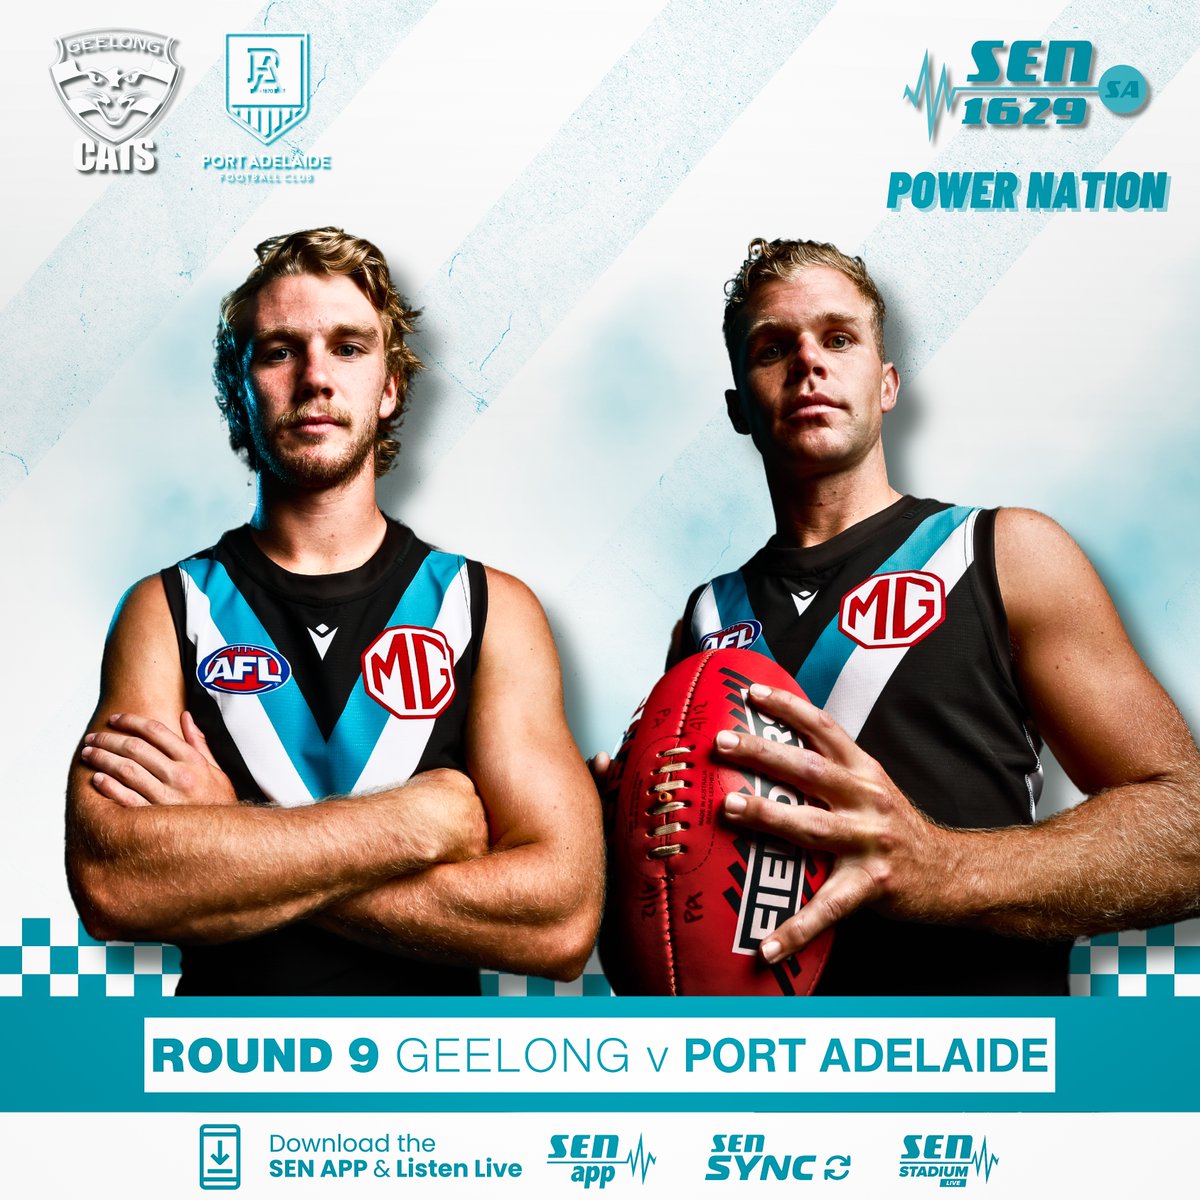 Power Nation! Catch tonight’s game against the Cats 𝐋𝐈𝐕𝐄 on @1629senSA ➕ the 𝗦𝗘𝗡 𝗔𝗽𝗽 📲

👉 Join the call team from 6:30 pm ⏰

📲 sen.lu/SENApp
📻 sen.com.au

#AFLCatsPower #PowerNation ⚡️